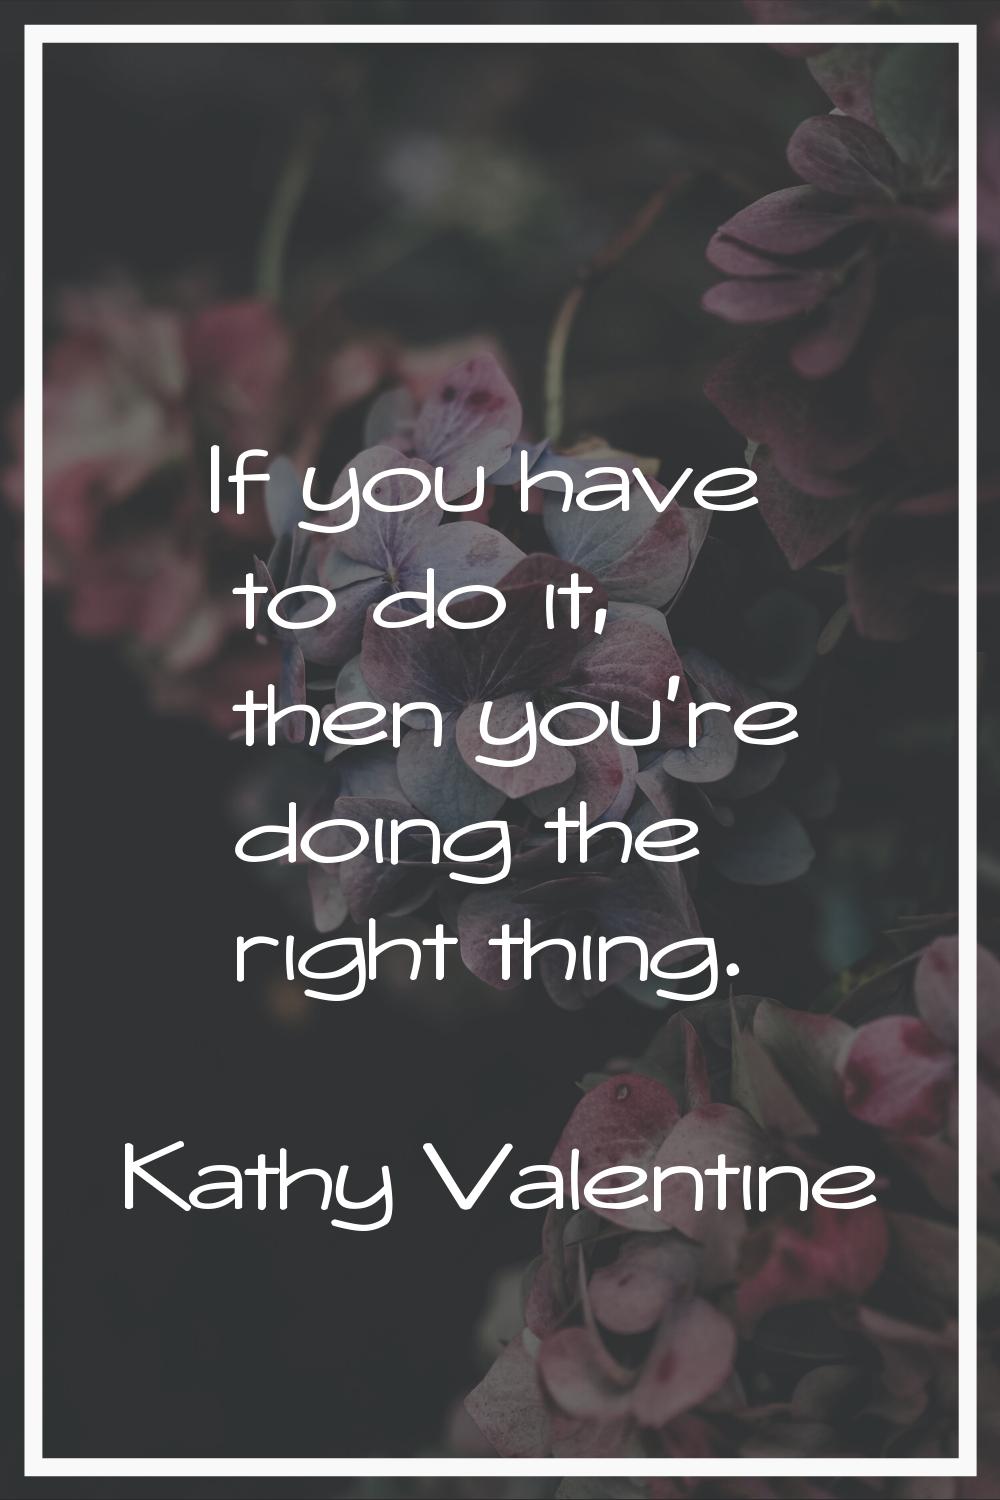 If you have to do it, then you're doing the right thing.